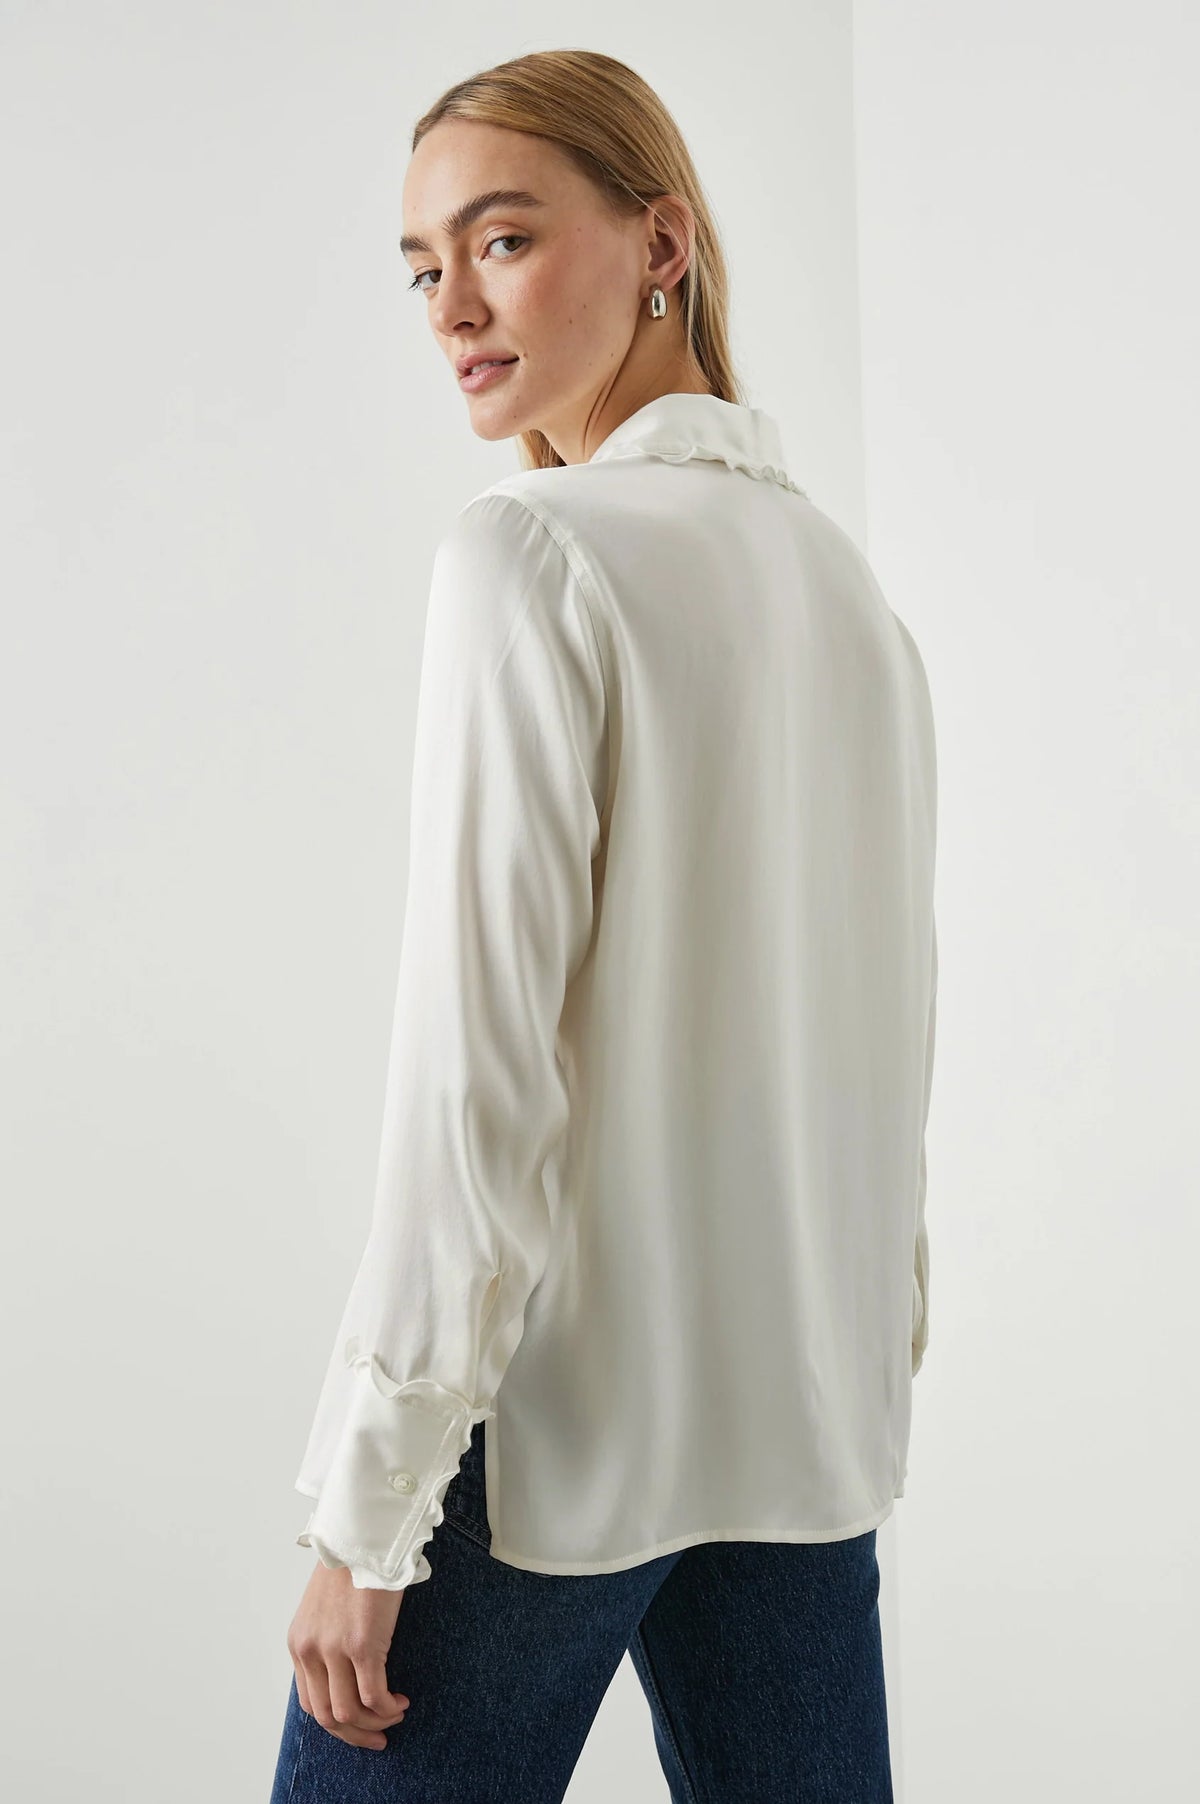 Silk ivory shirt with ruffle details